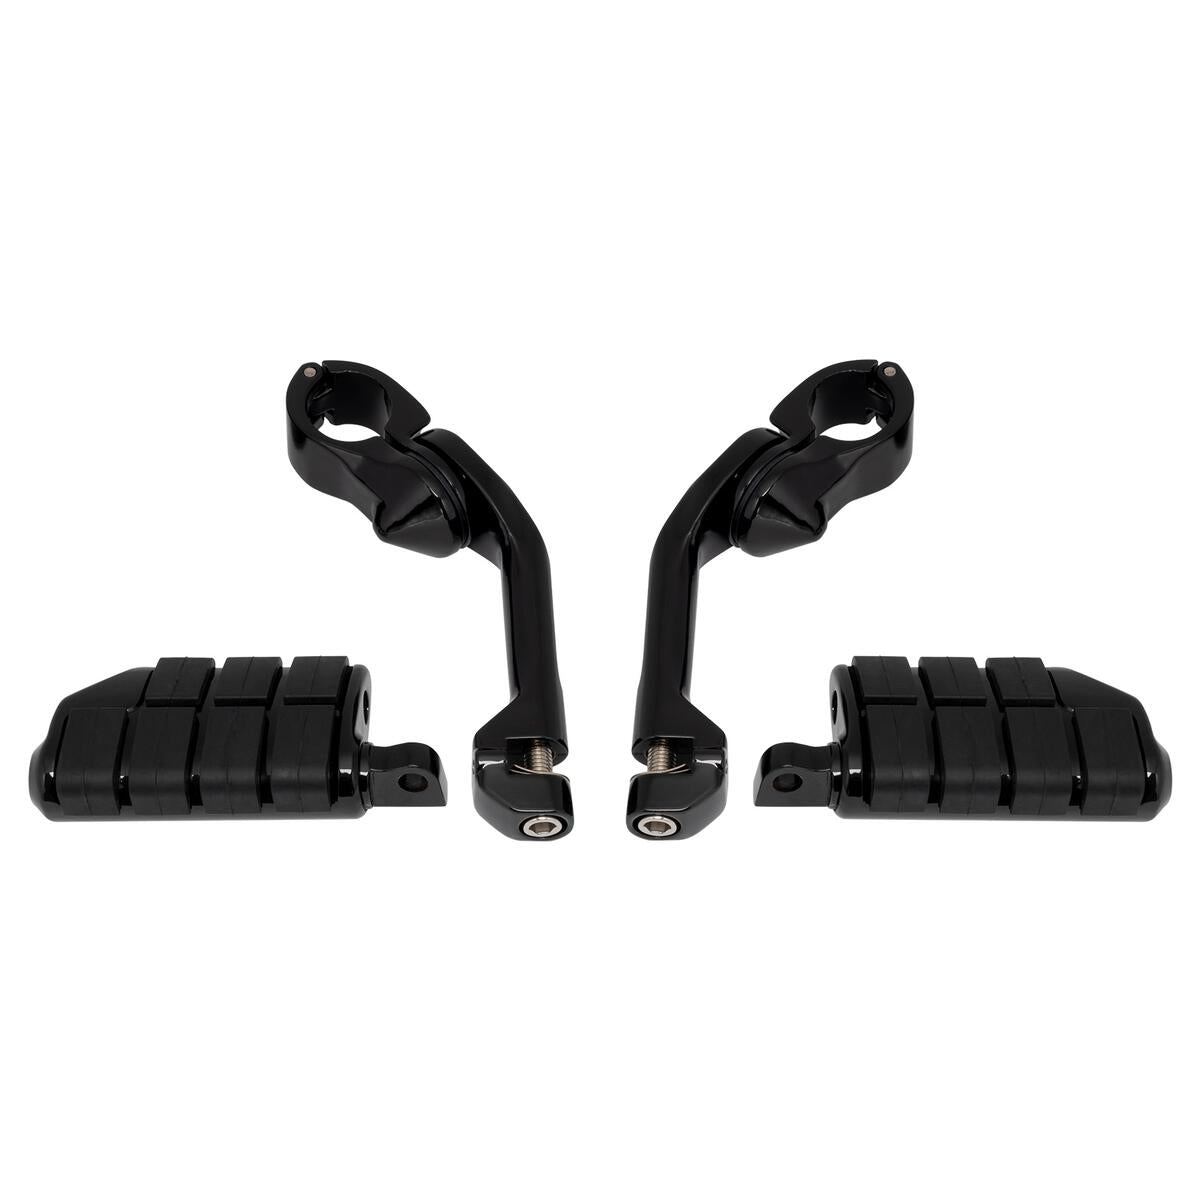 Black Long Angled Adjustable Highway Foot Pegs & Clamps